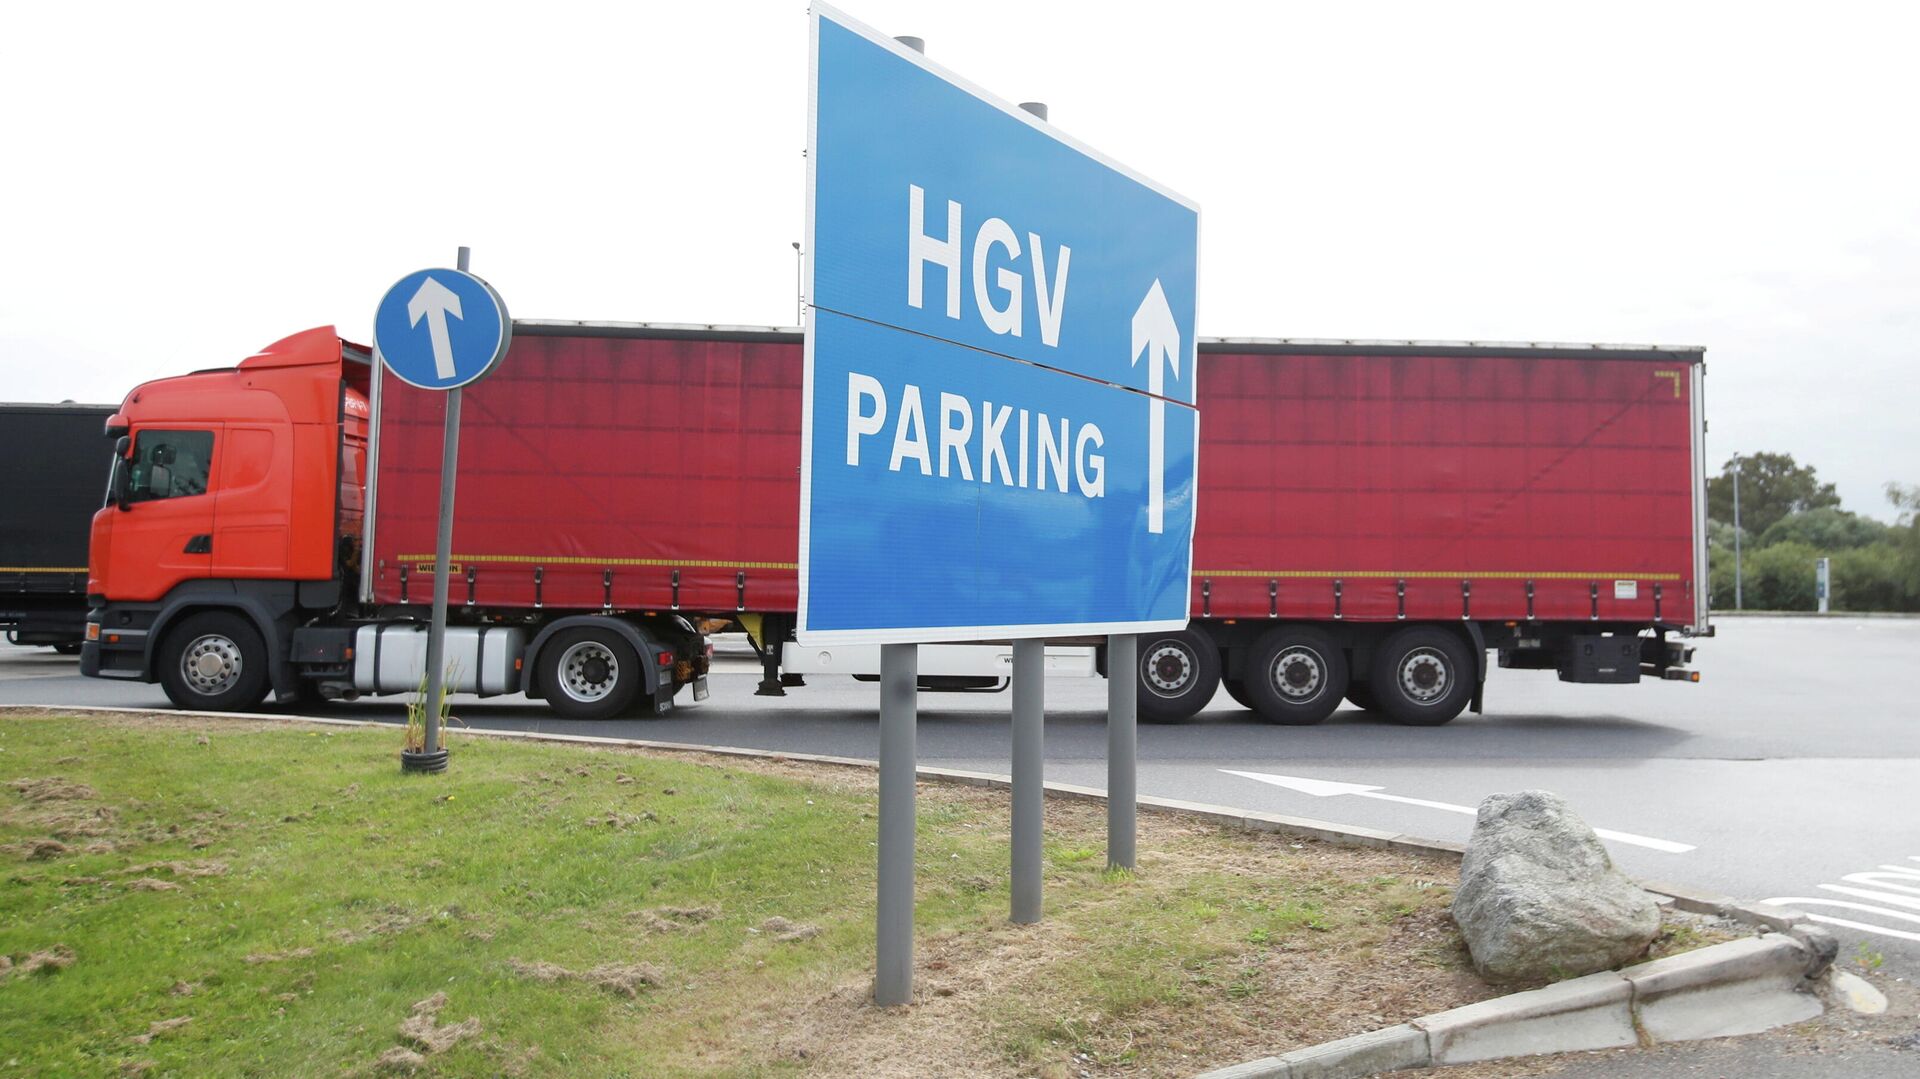 Lorries are seen at an HGV parking, at Cobham services on the M25 motorway, Cobham, Britain, August 31, 2021 - Sputnik International, 1920, 02.10.2021